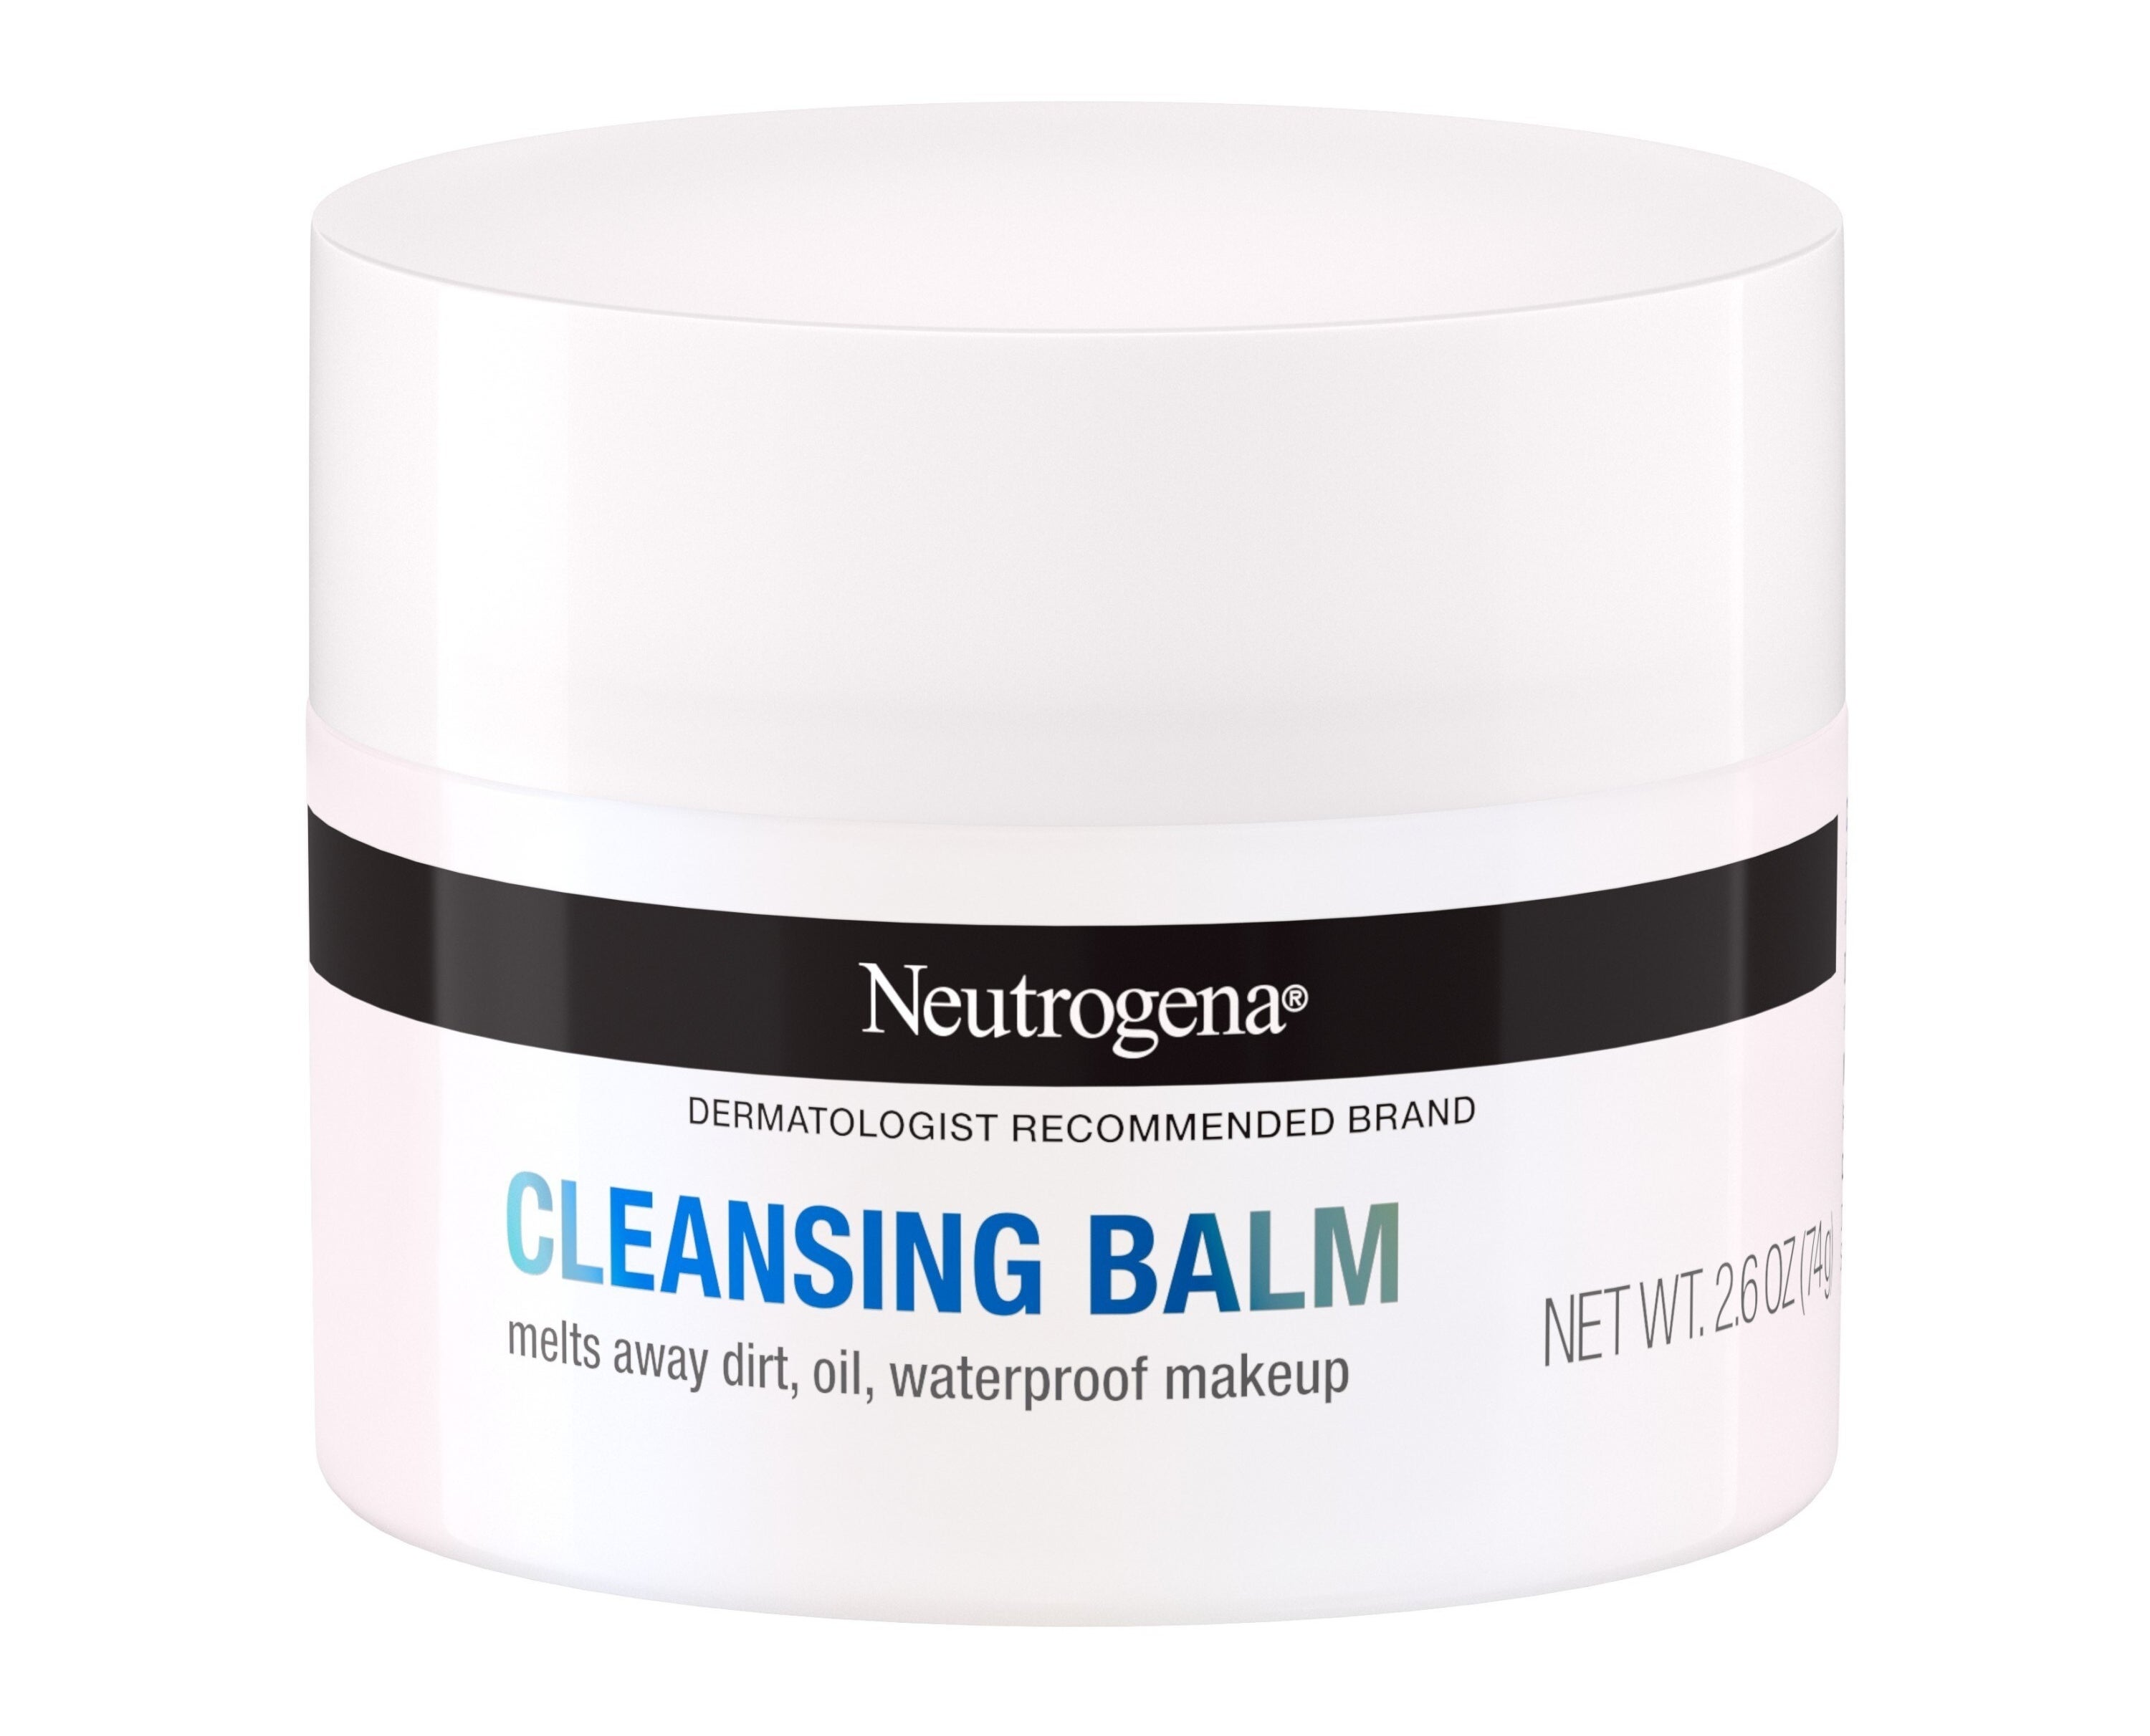 The cleansing balm